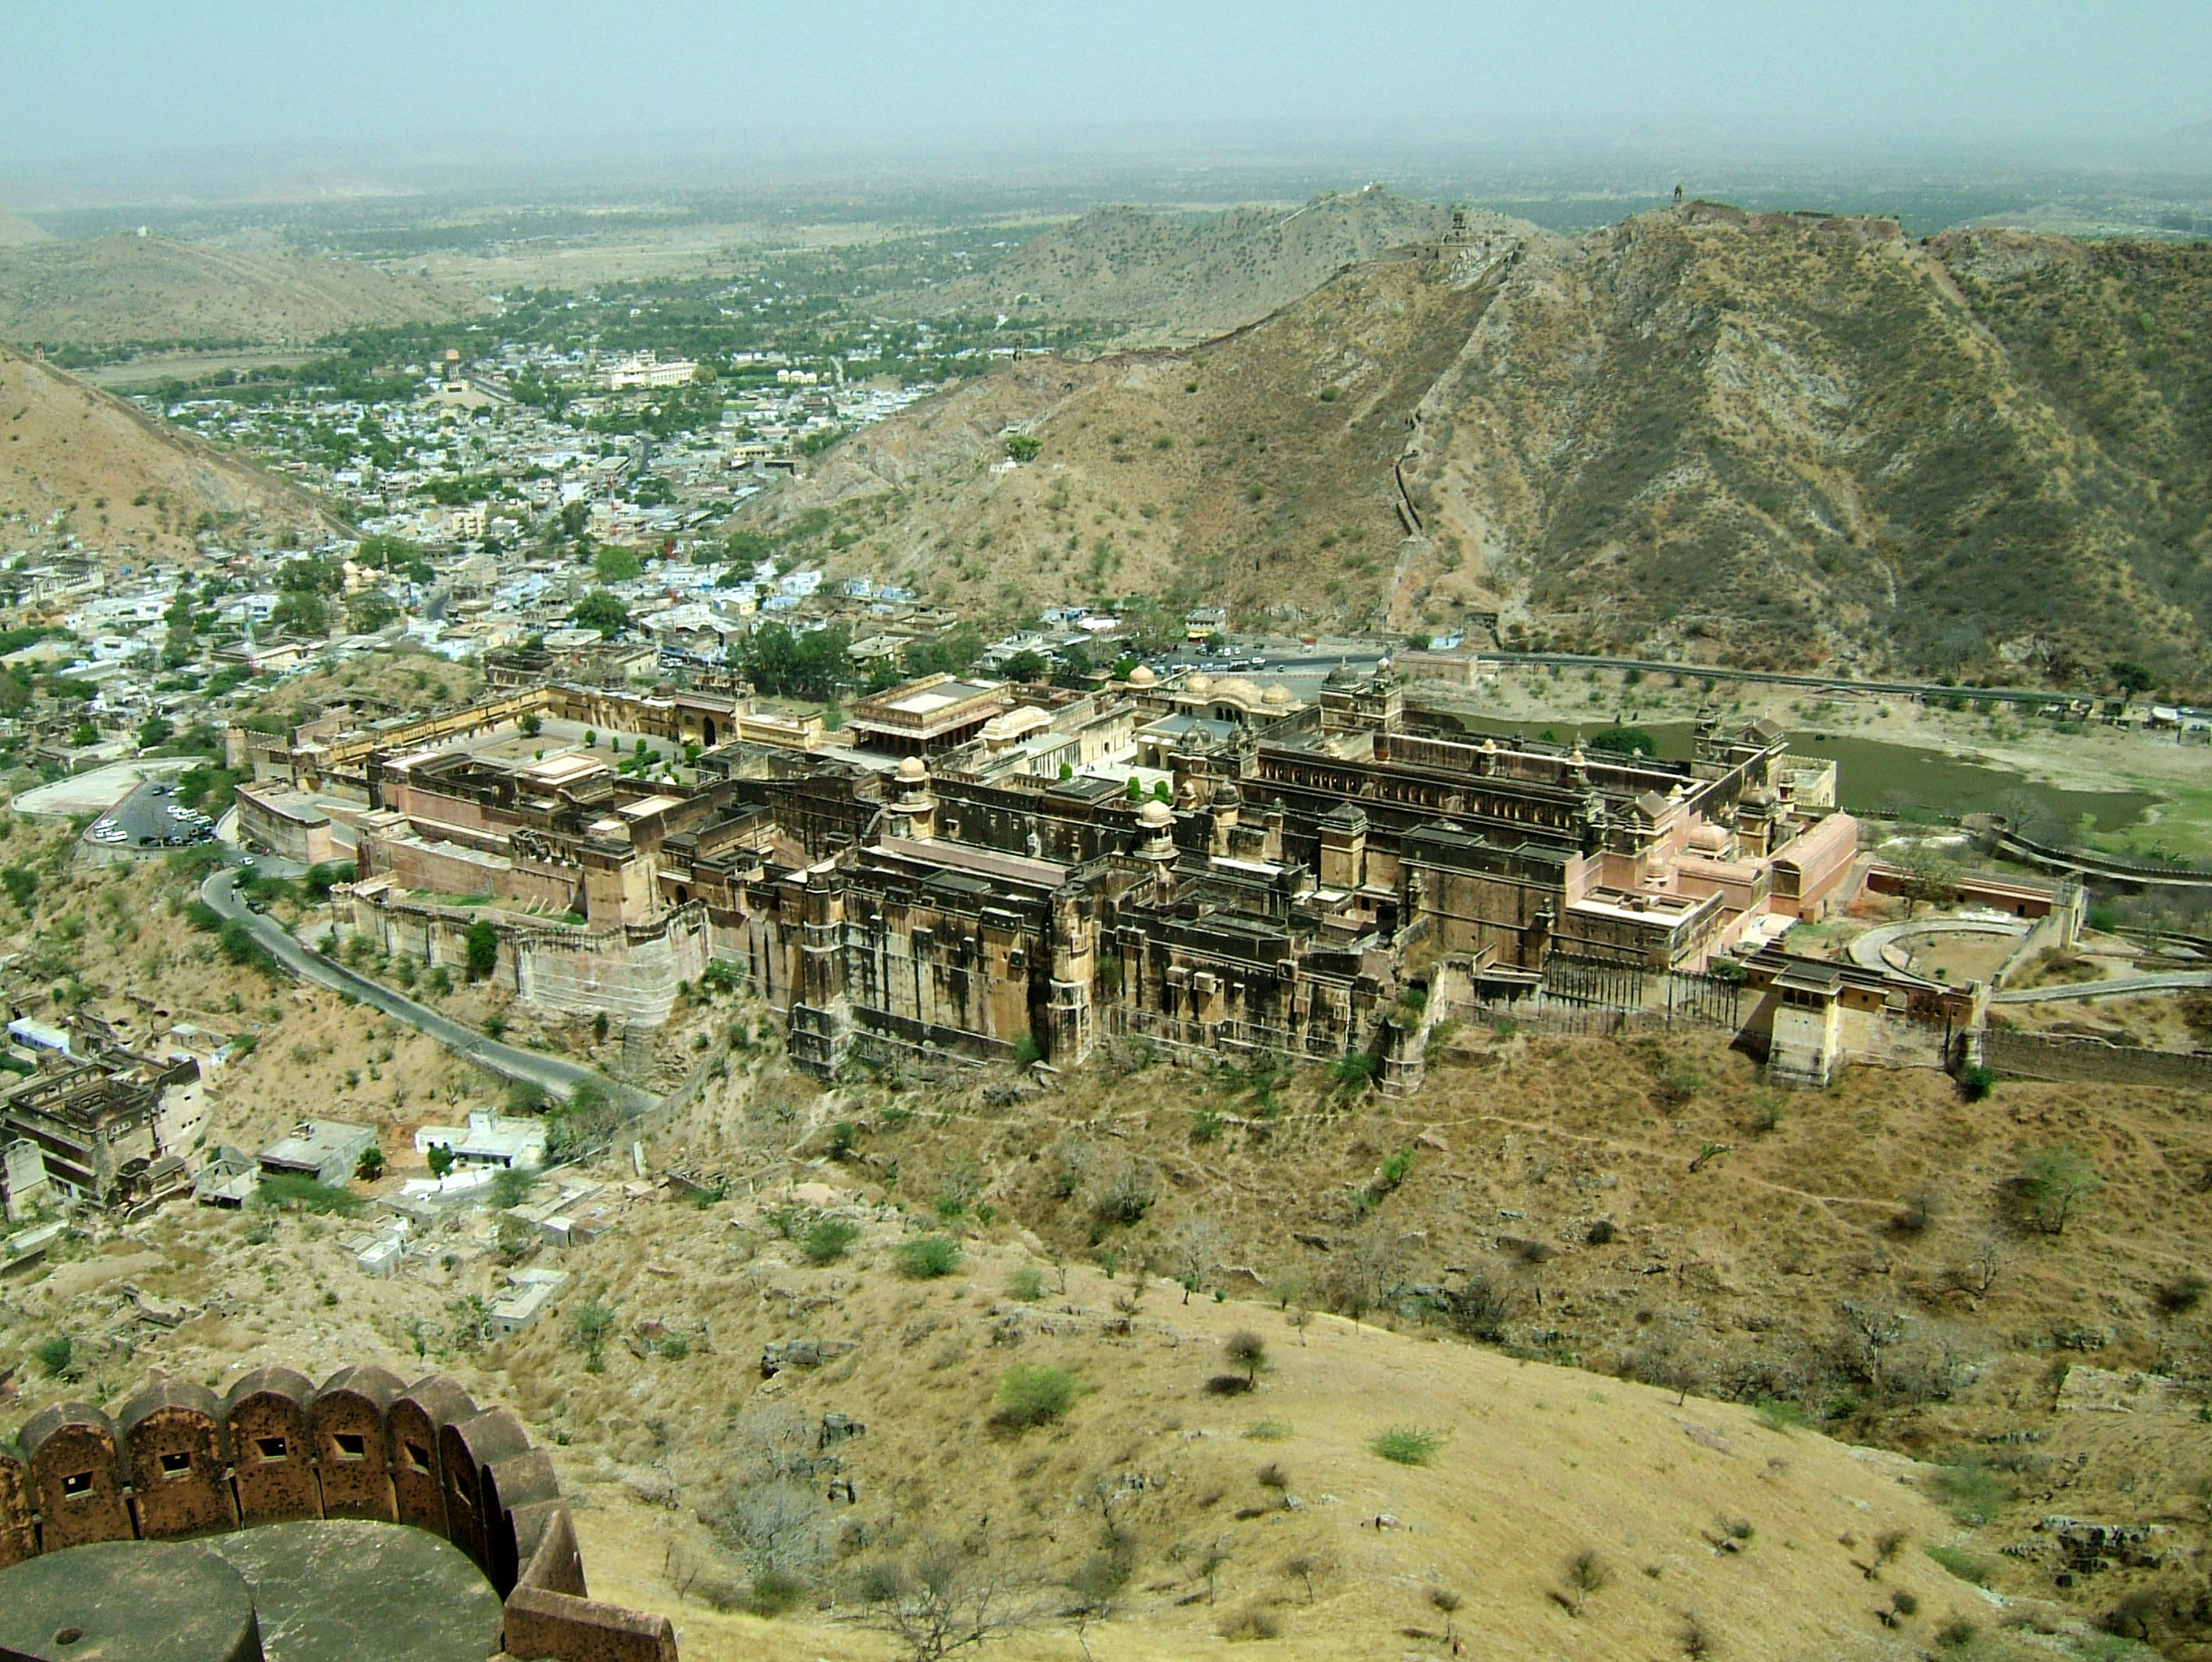 Rajasthan Jaipur Jaigarh Fort view of Amber Fort India Apr 2004 01